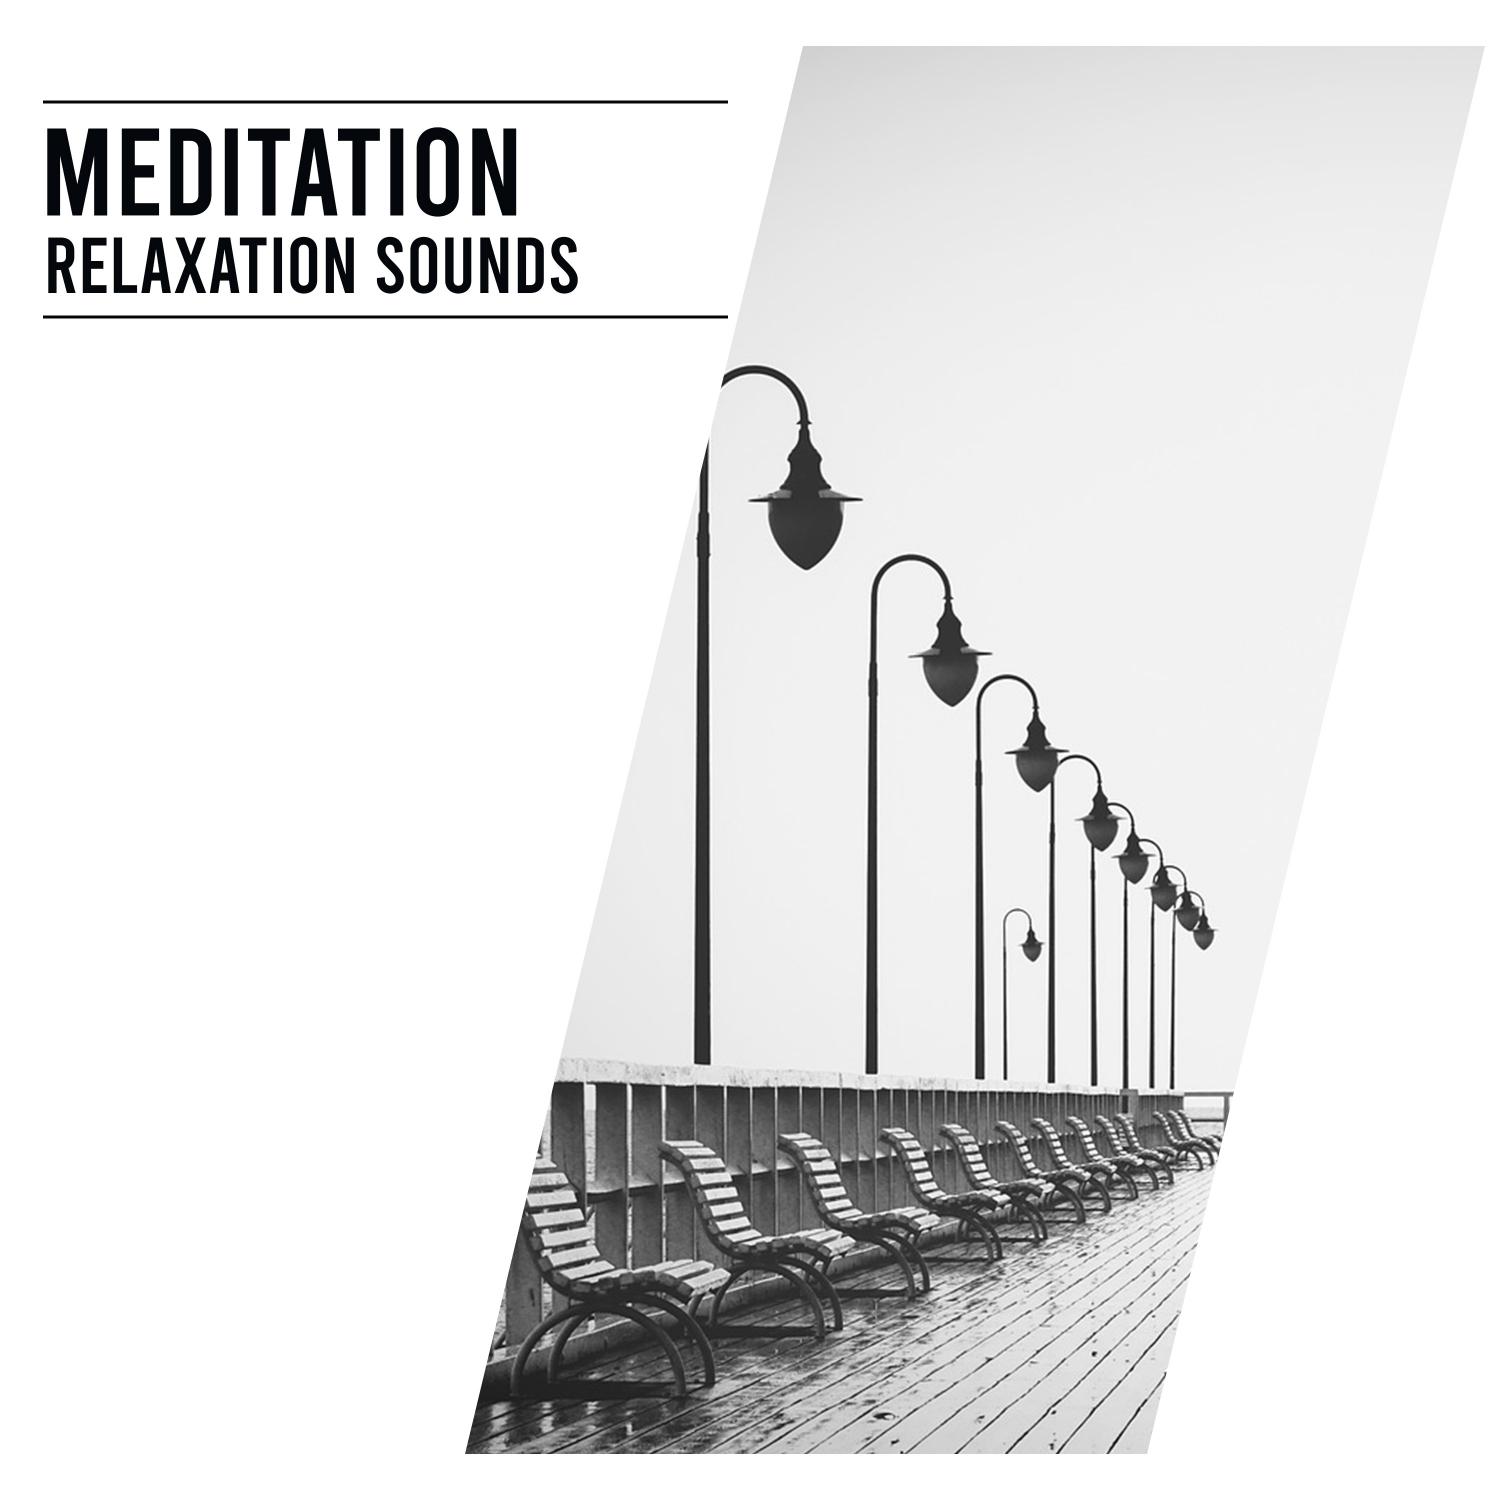 17 Meditation Relaxation Sounds Natural and Ambient Rainfall